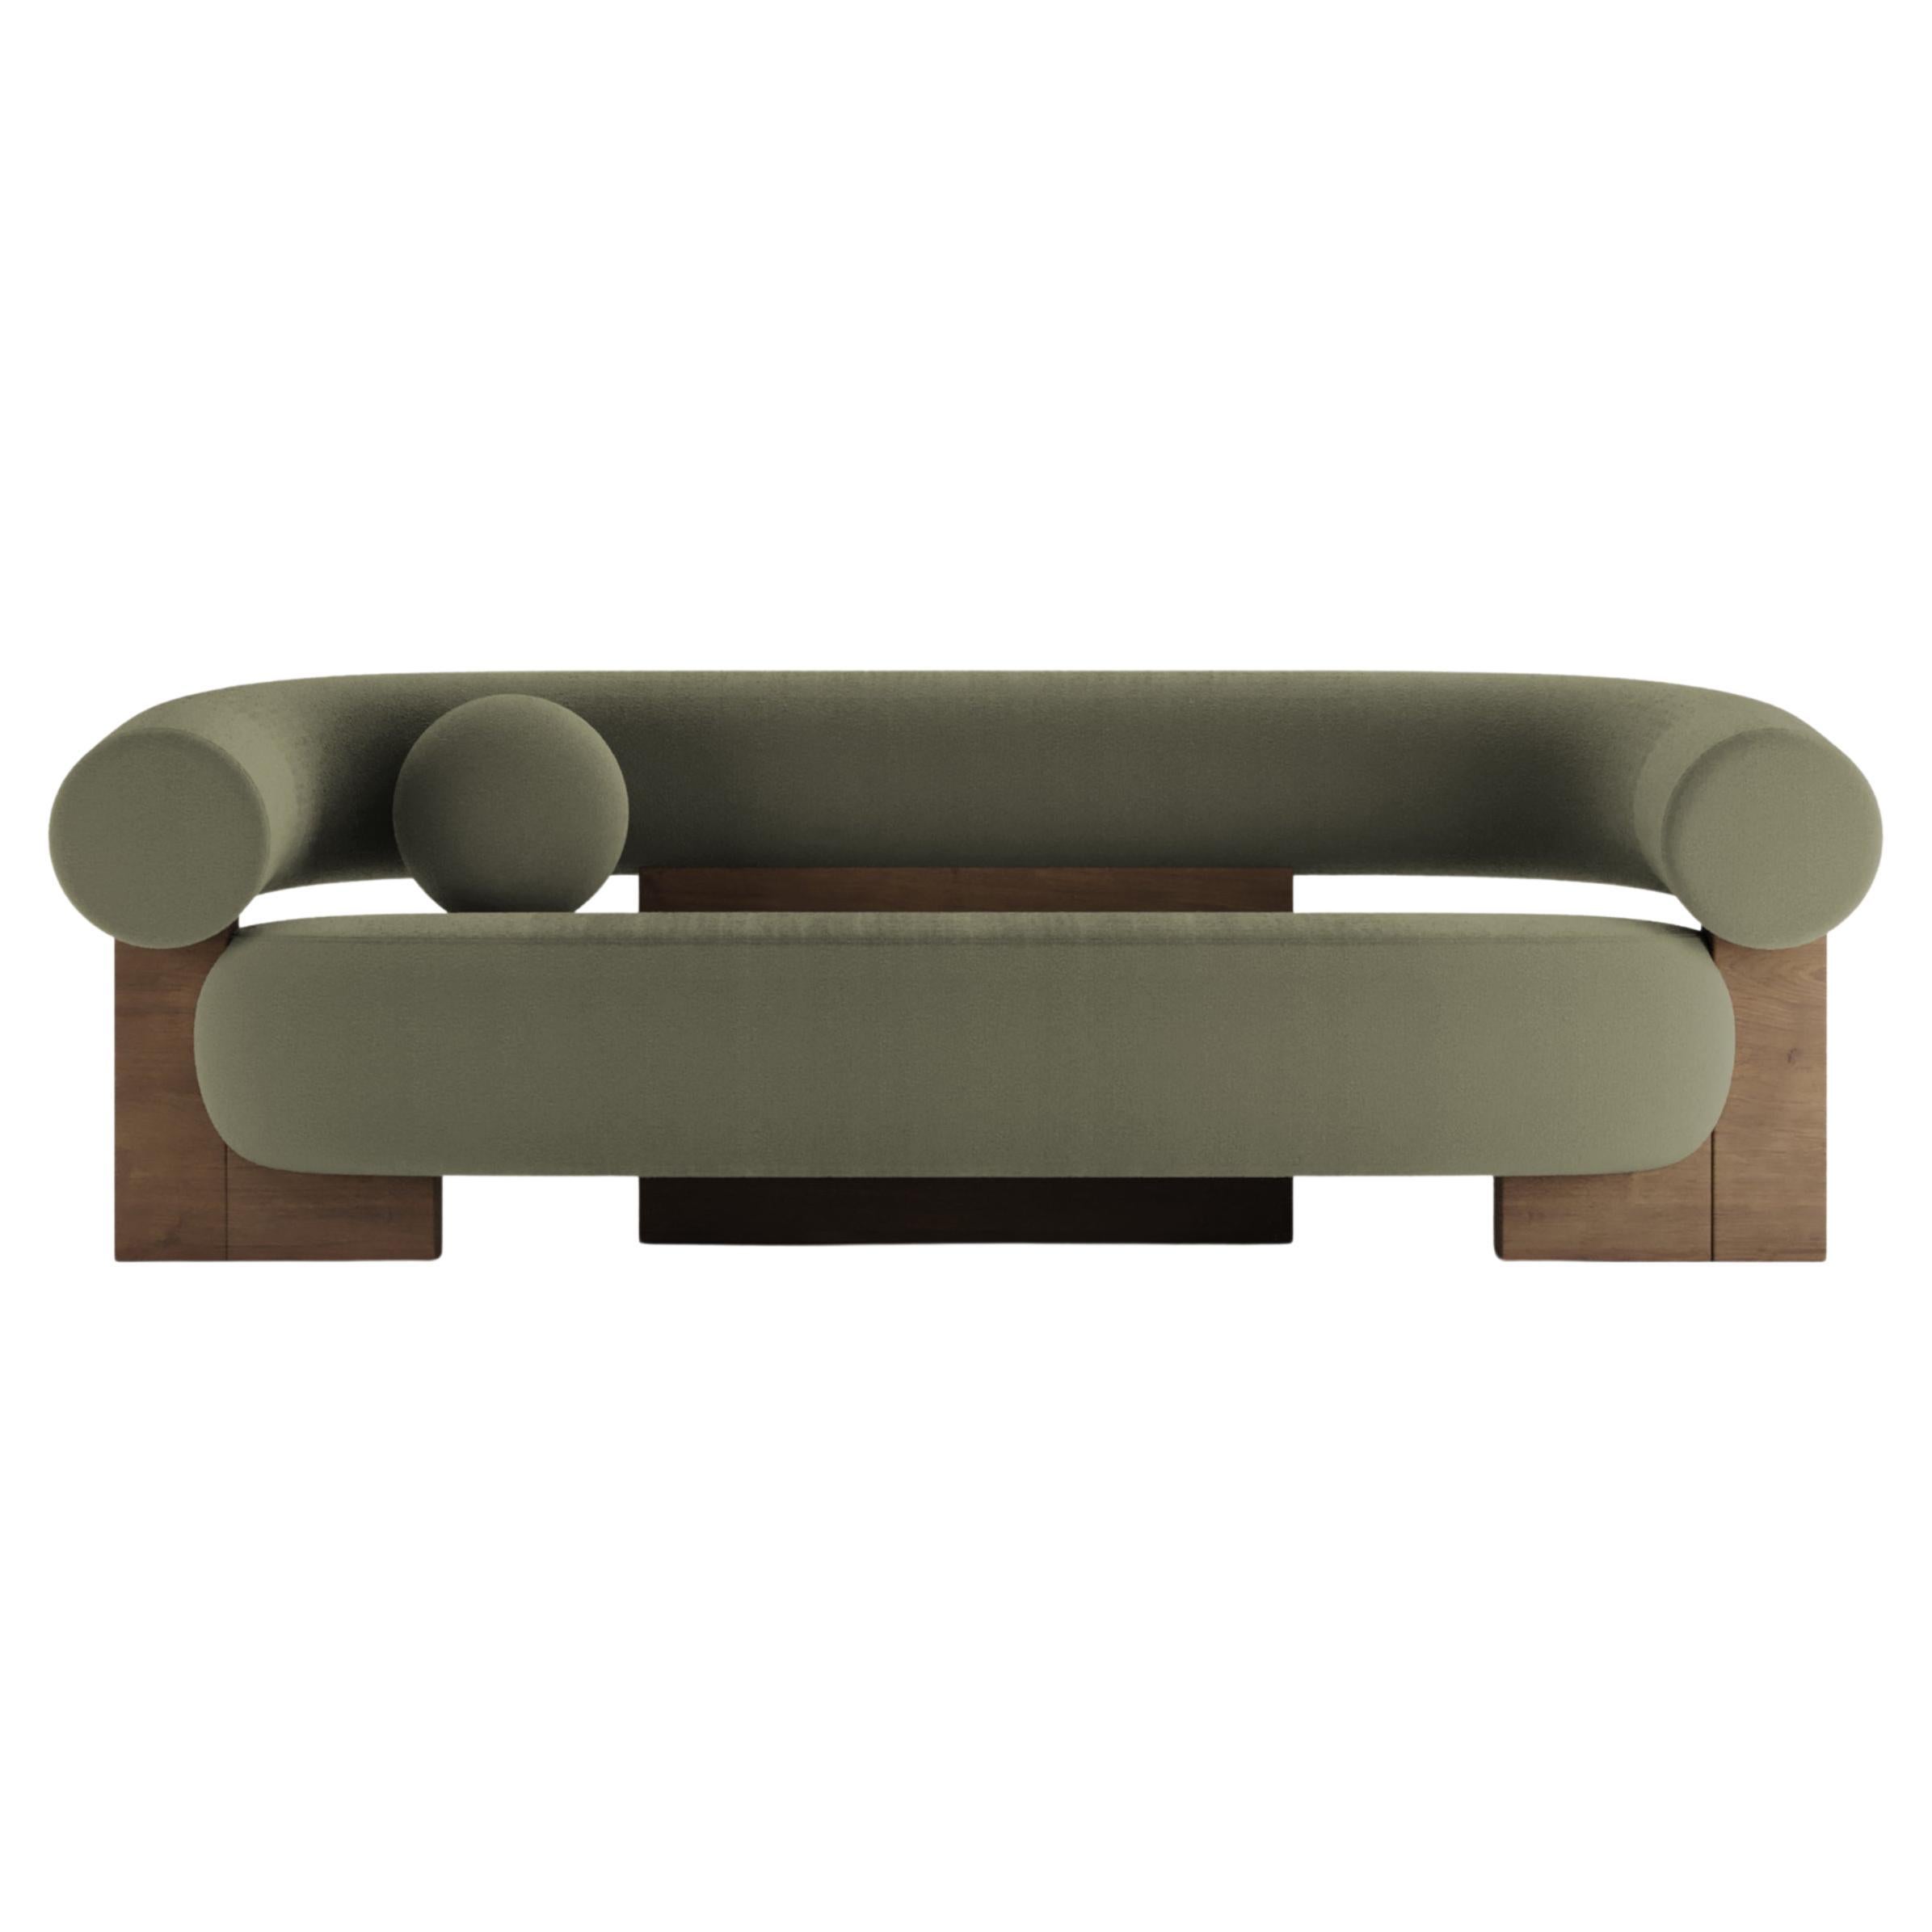 Contemporary Modern Cassete Sofa in Olive & Wood by Collector Studio